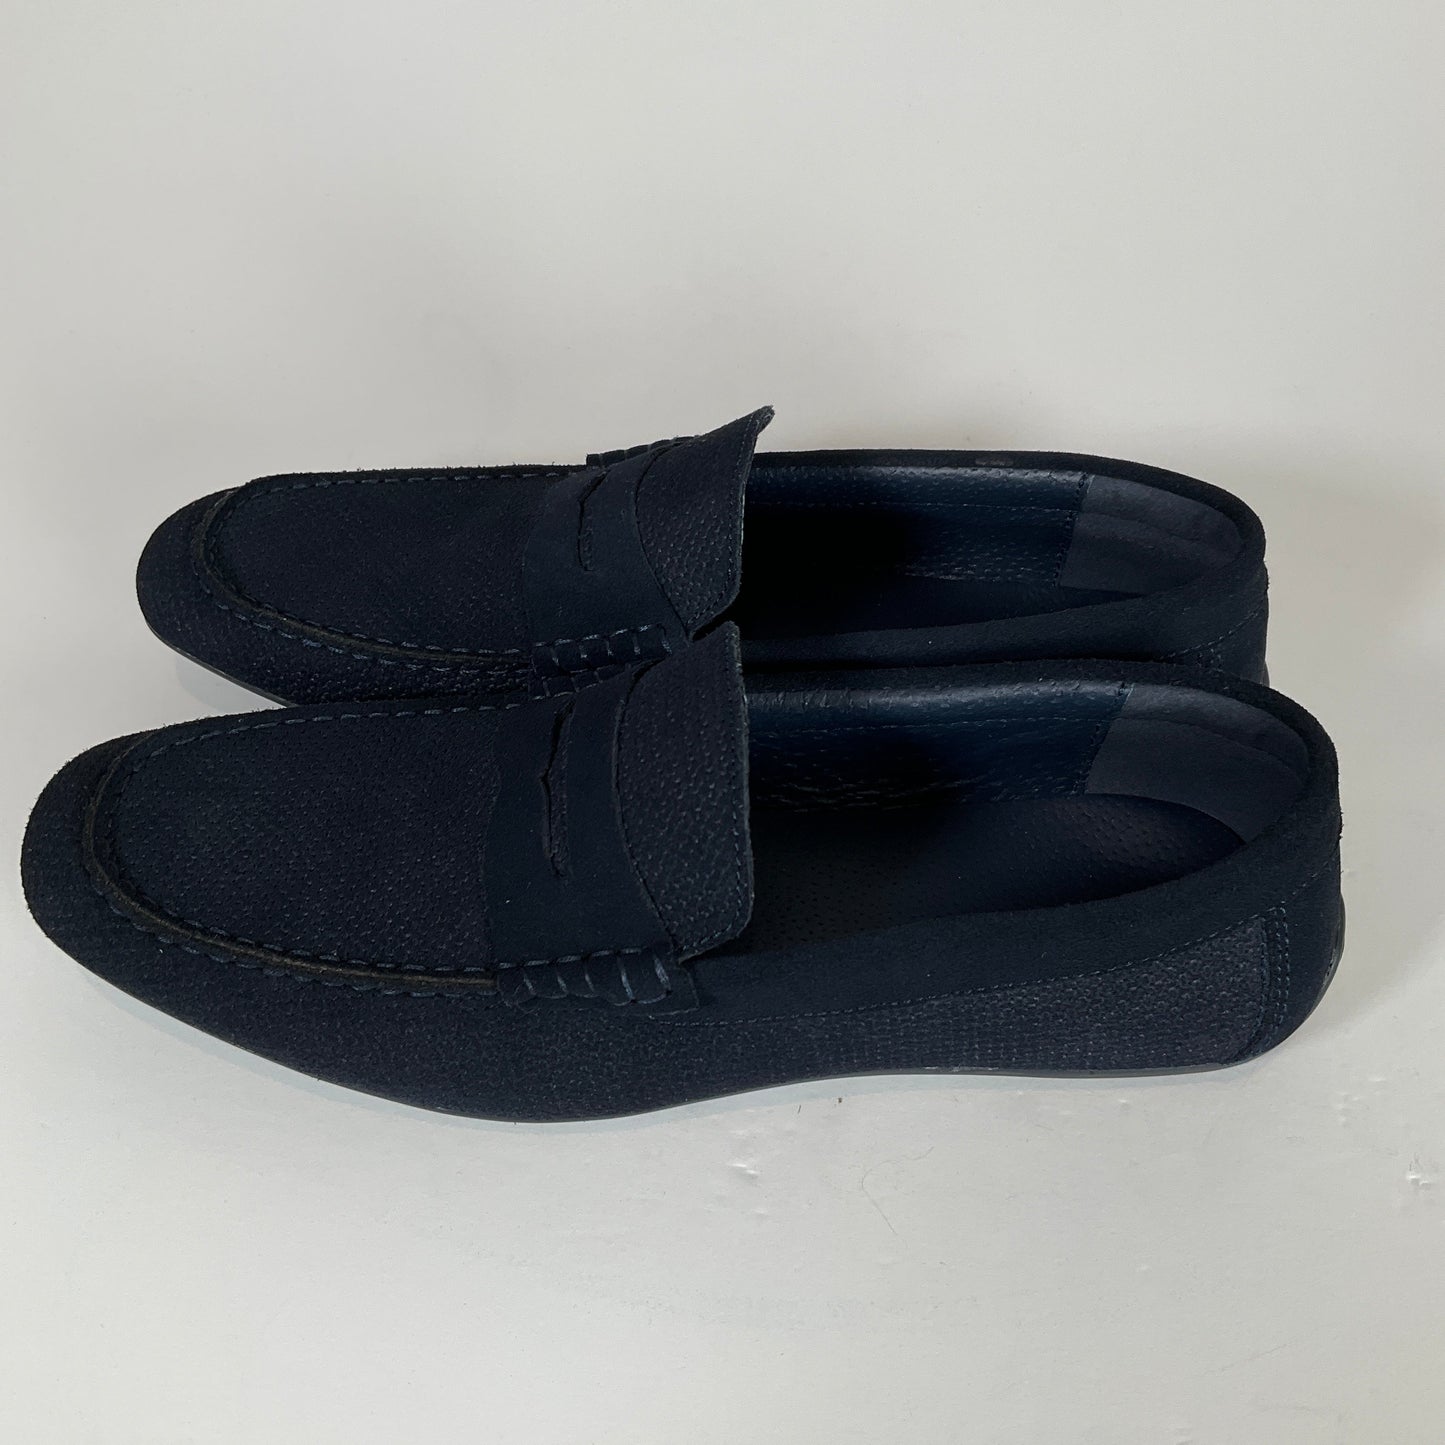 Yd. - Navy Loafers Size 11 Shoes